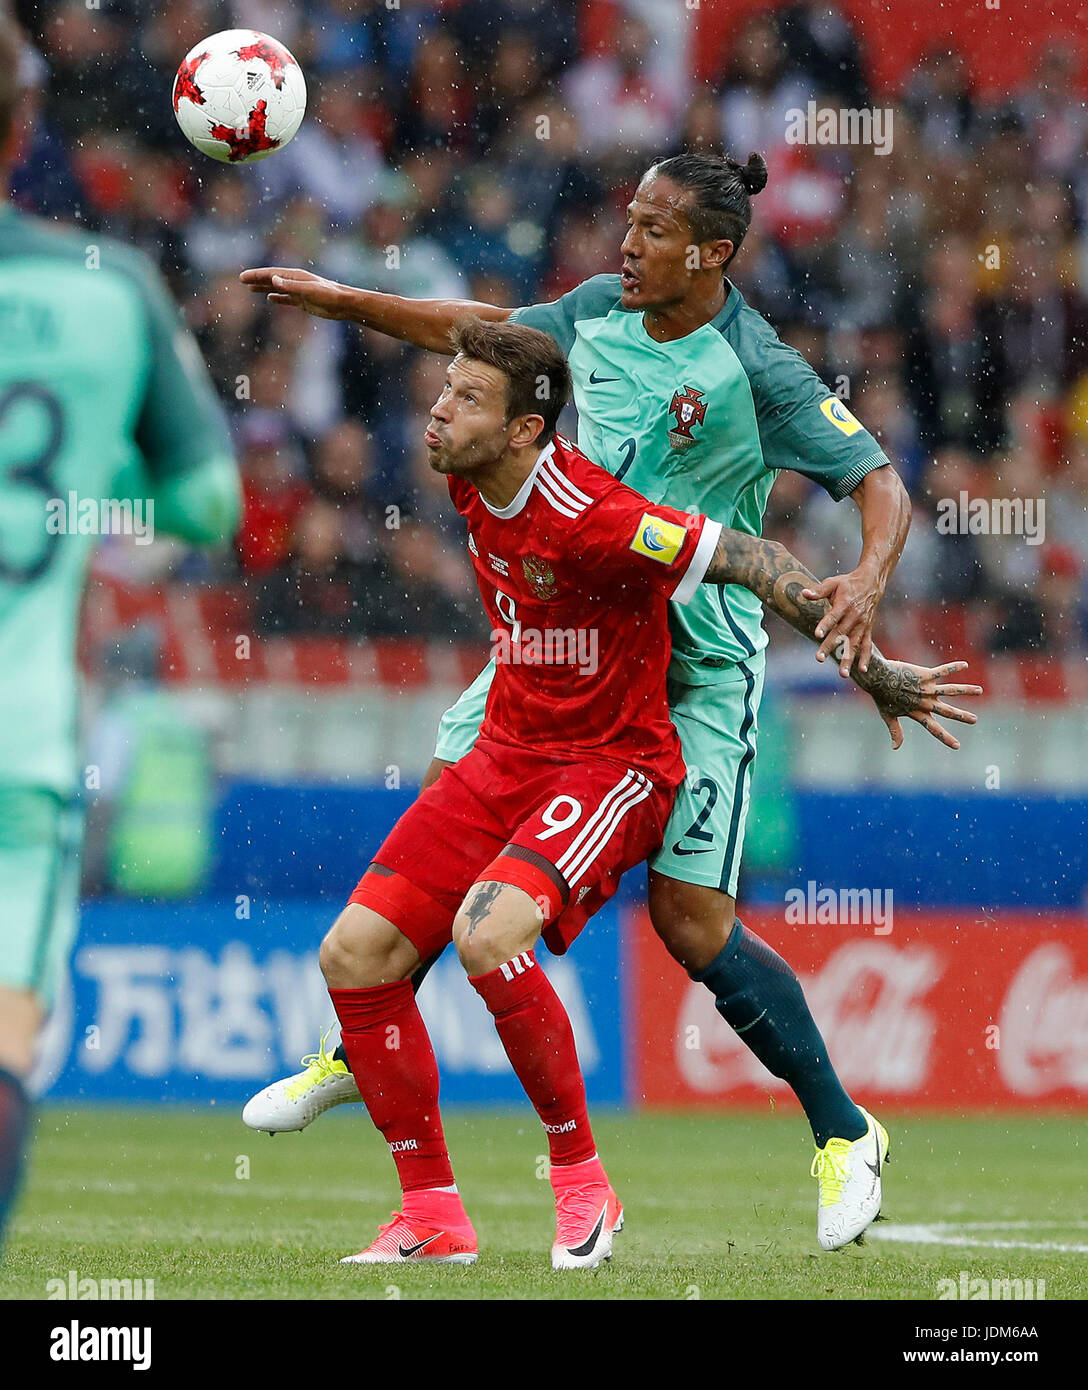 Moscow, Russia. 21st Jun, 2017. BRUNO ALVES of Portugal dispute with Dmitry POLOZ of Russia during match between Russia and Portugal valid for the second round of the Confederations Cup 2017, on Wednesday (21), held at the Spartak Stadium (Otkrytie Arena) in Moscow, Russia . Credit: Foto Arena LTDA/Alamy Live News Stock Photo